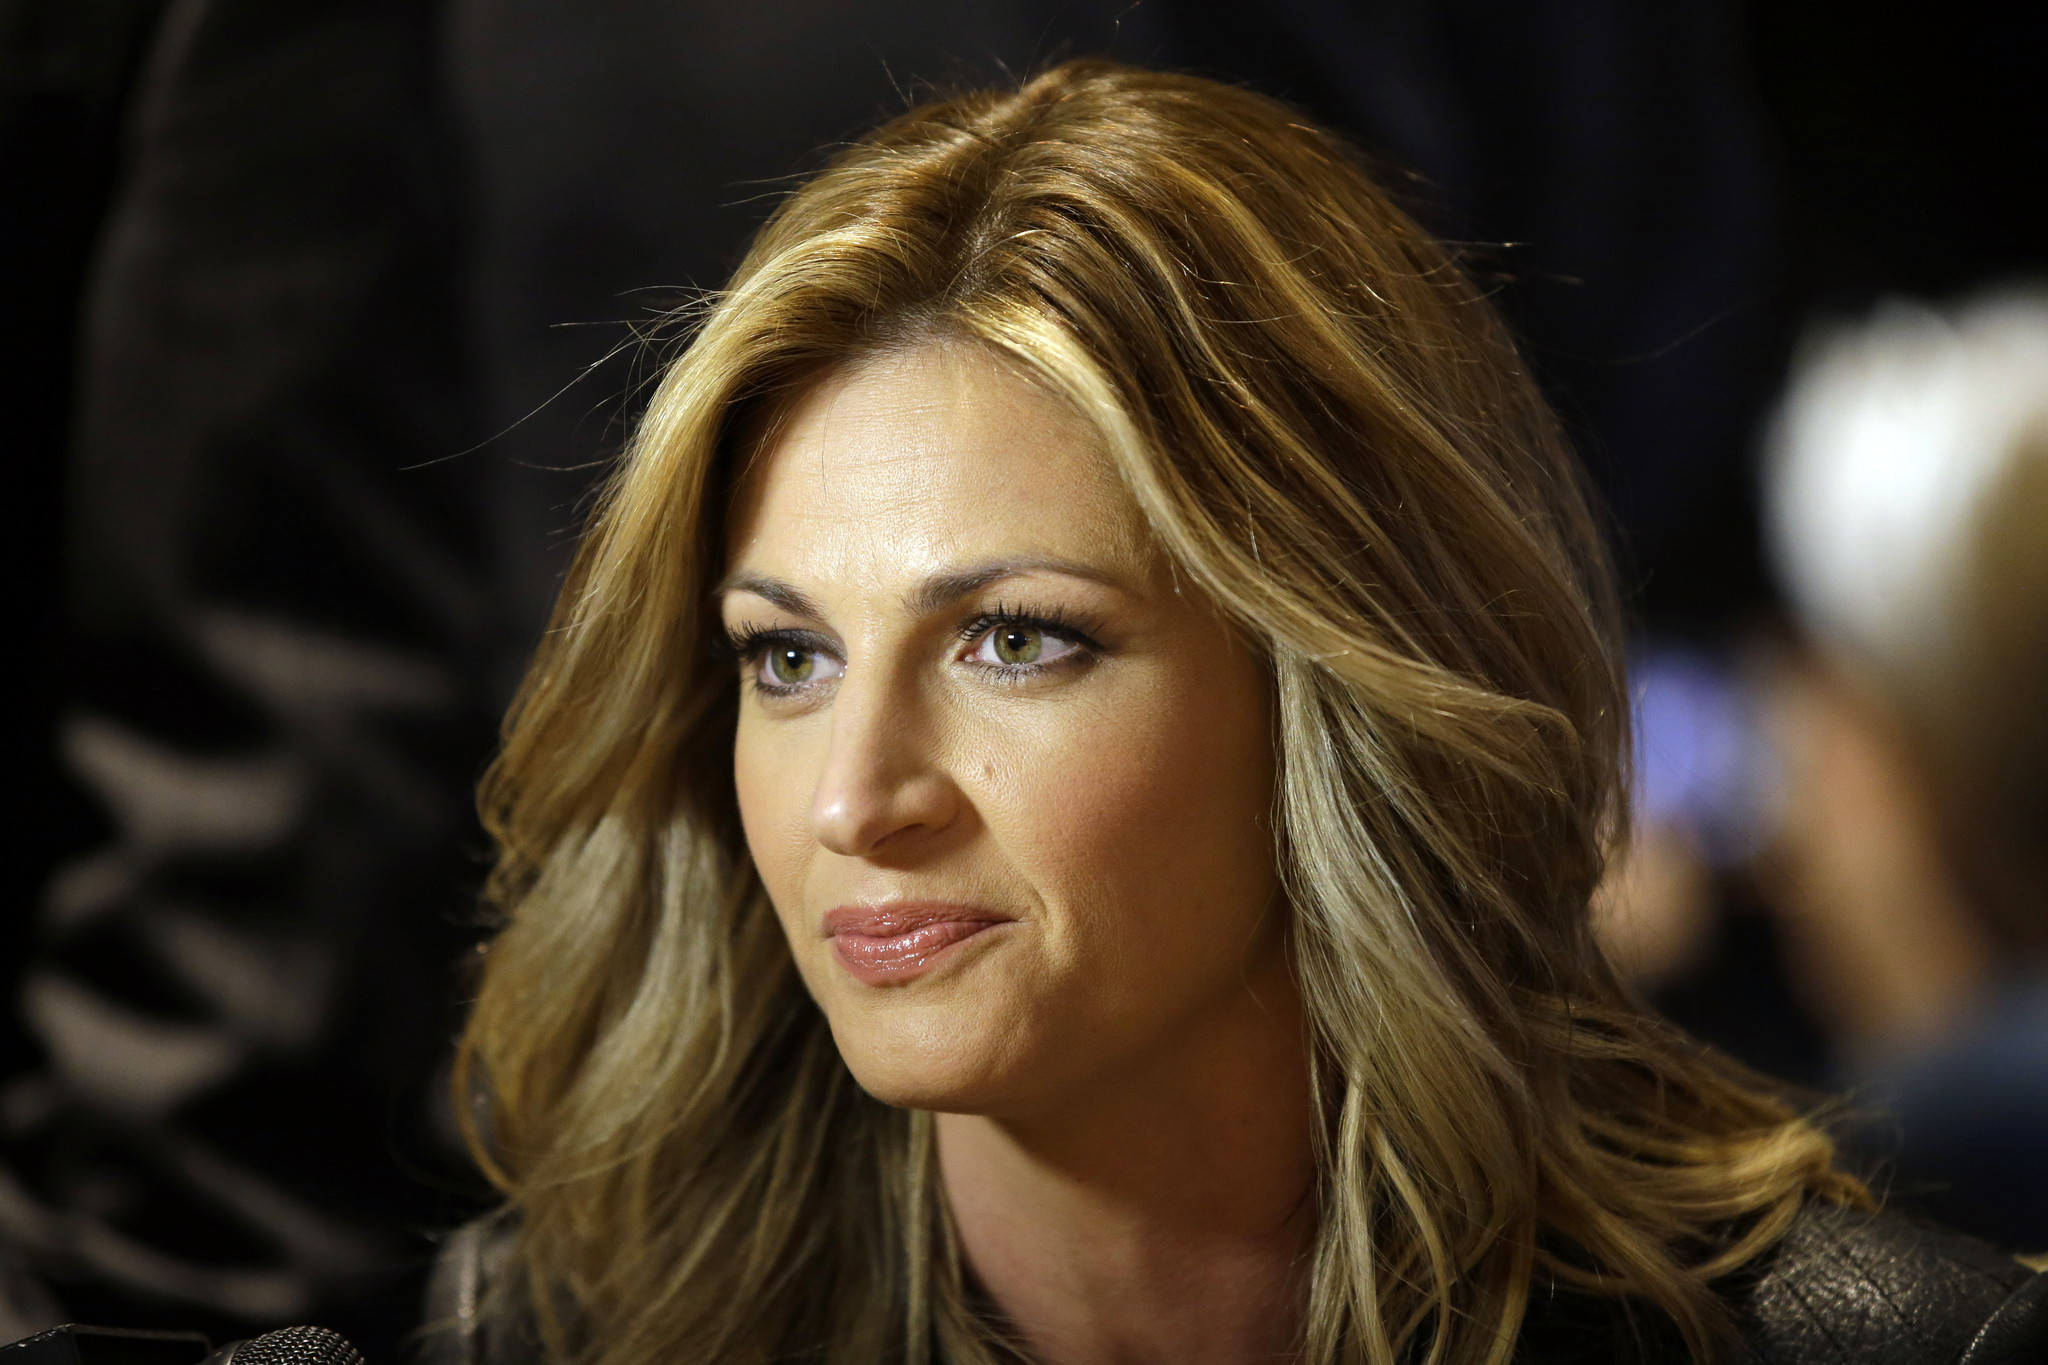 Man Pleads Guilty to Stalking Erin Andrews - CBS News